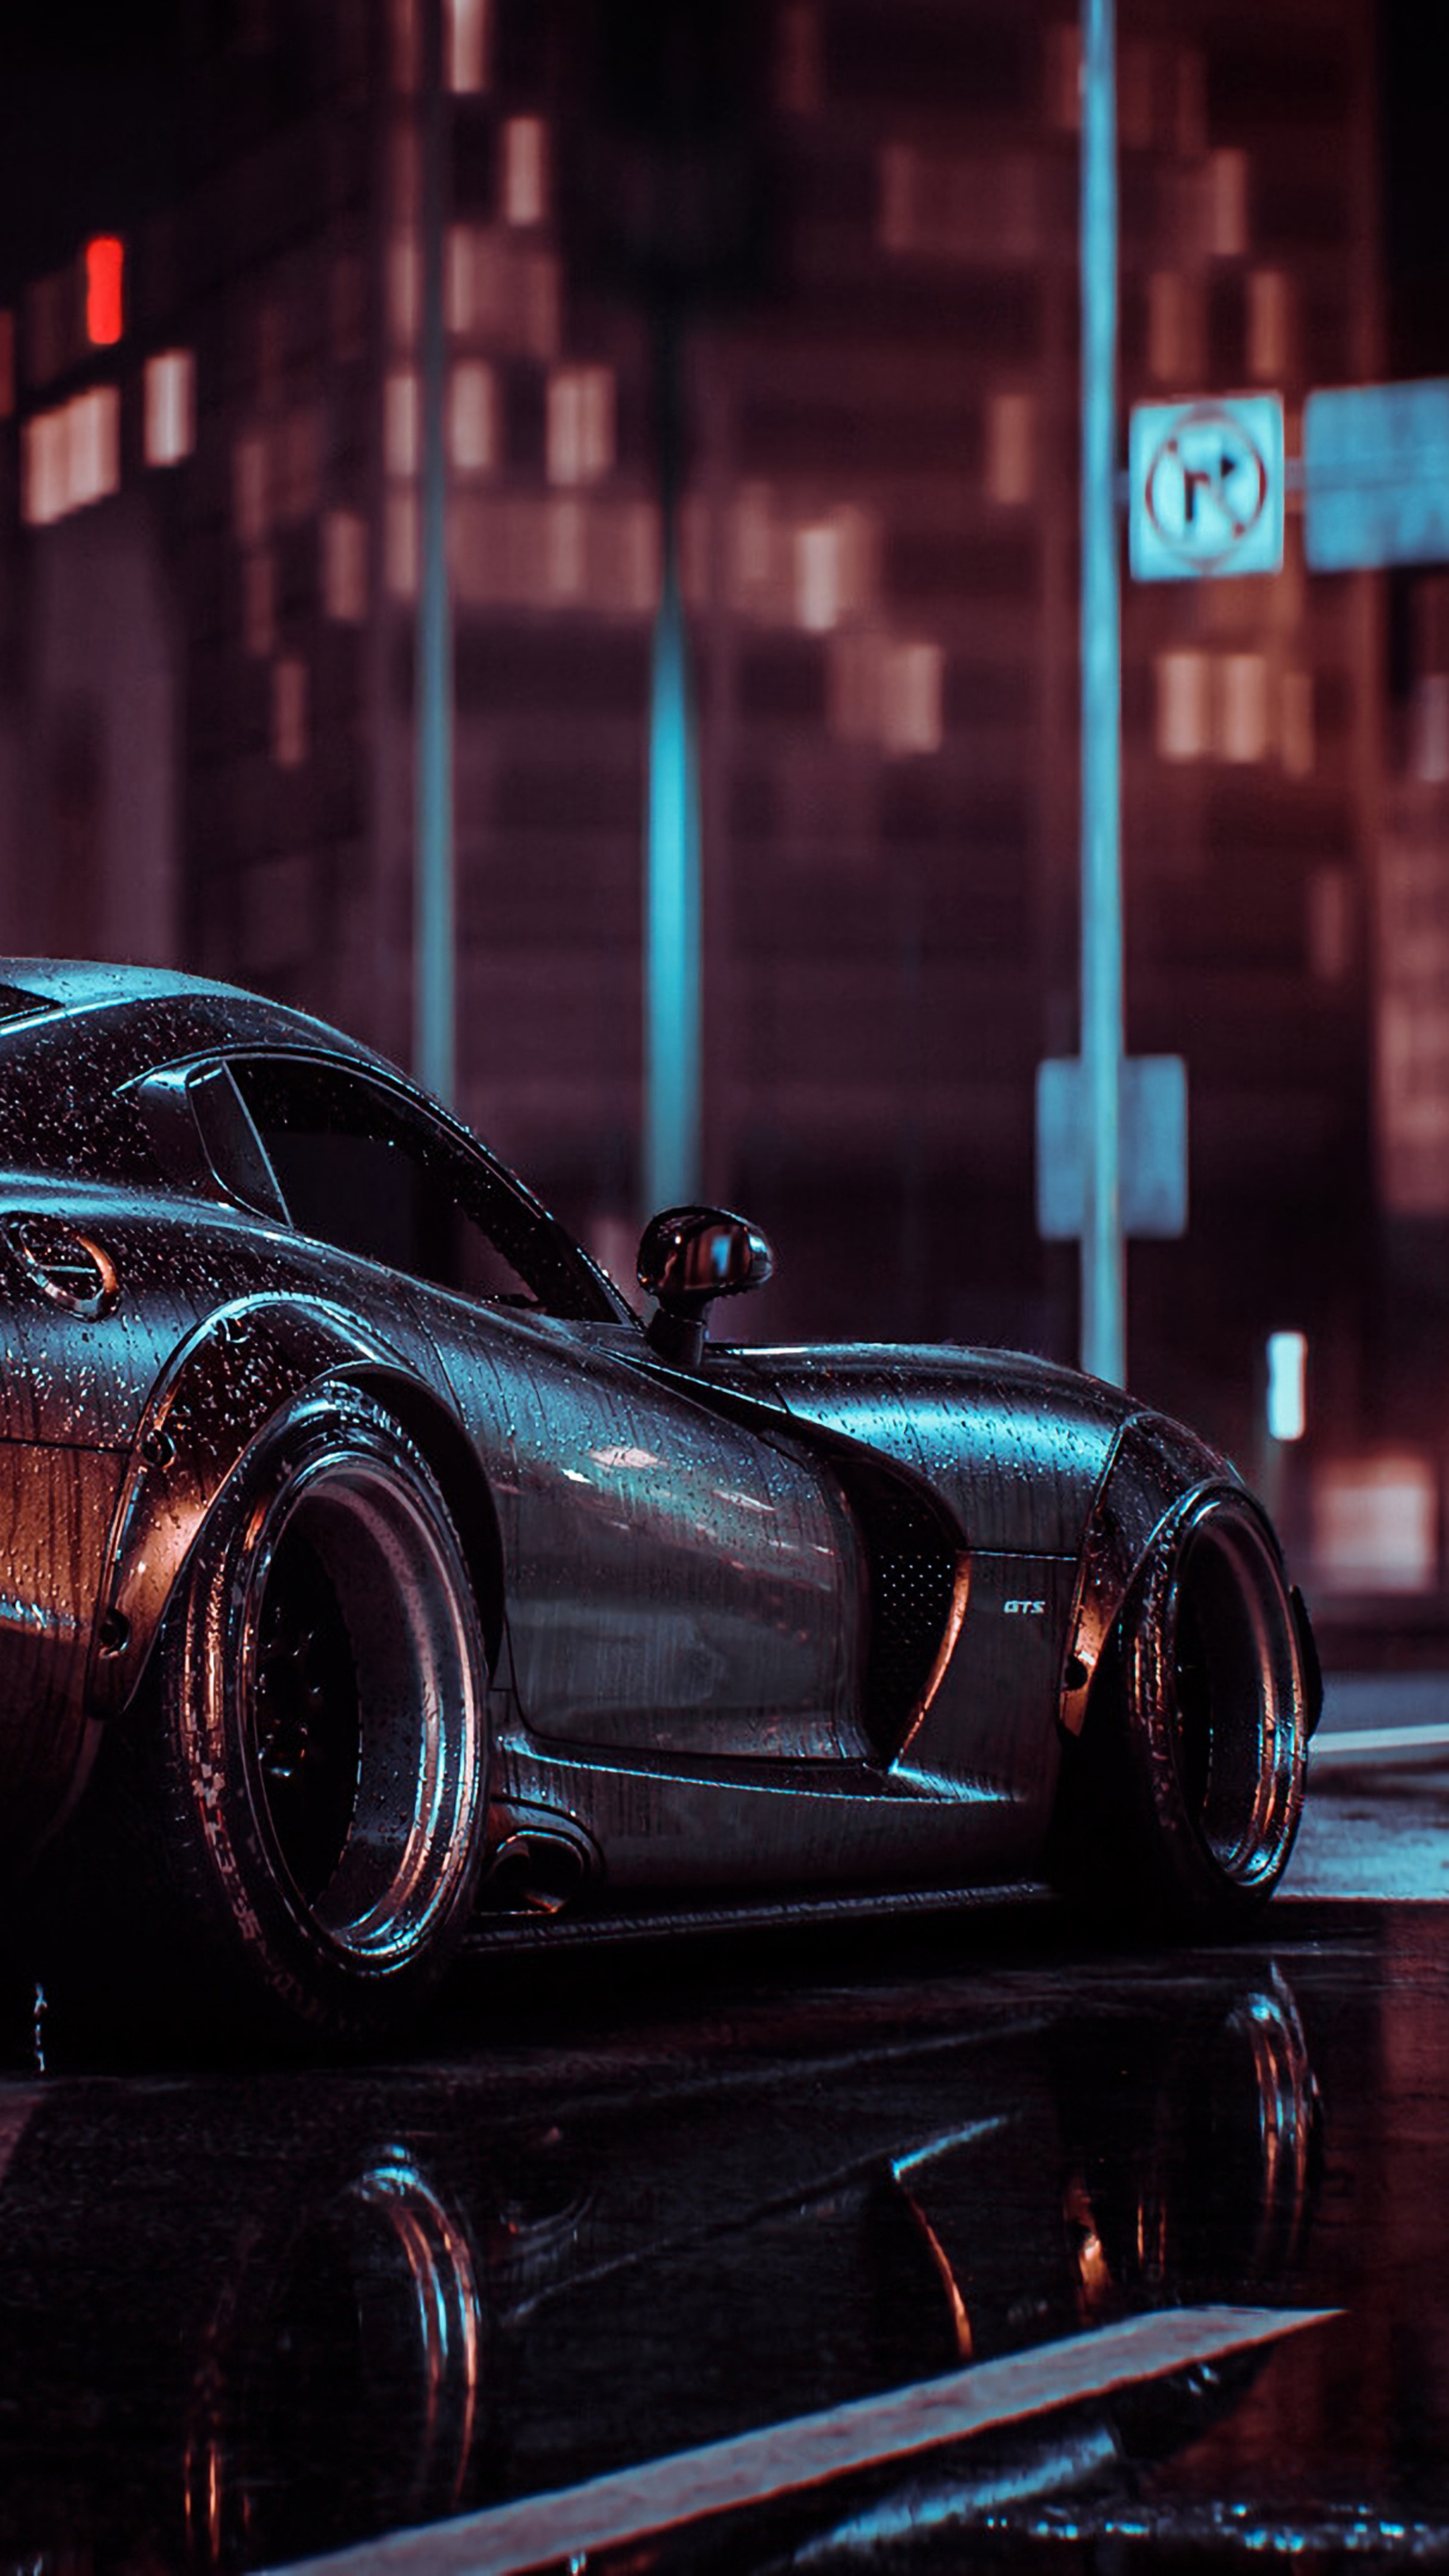 Dodge Viper, SRT, Need for Speed game, 2160x3840 4K Handy